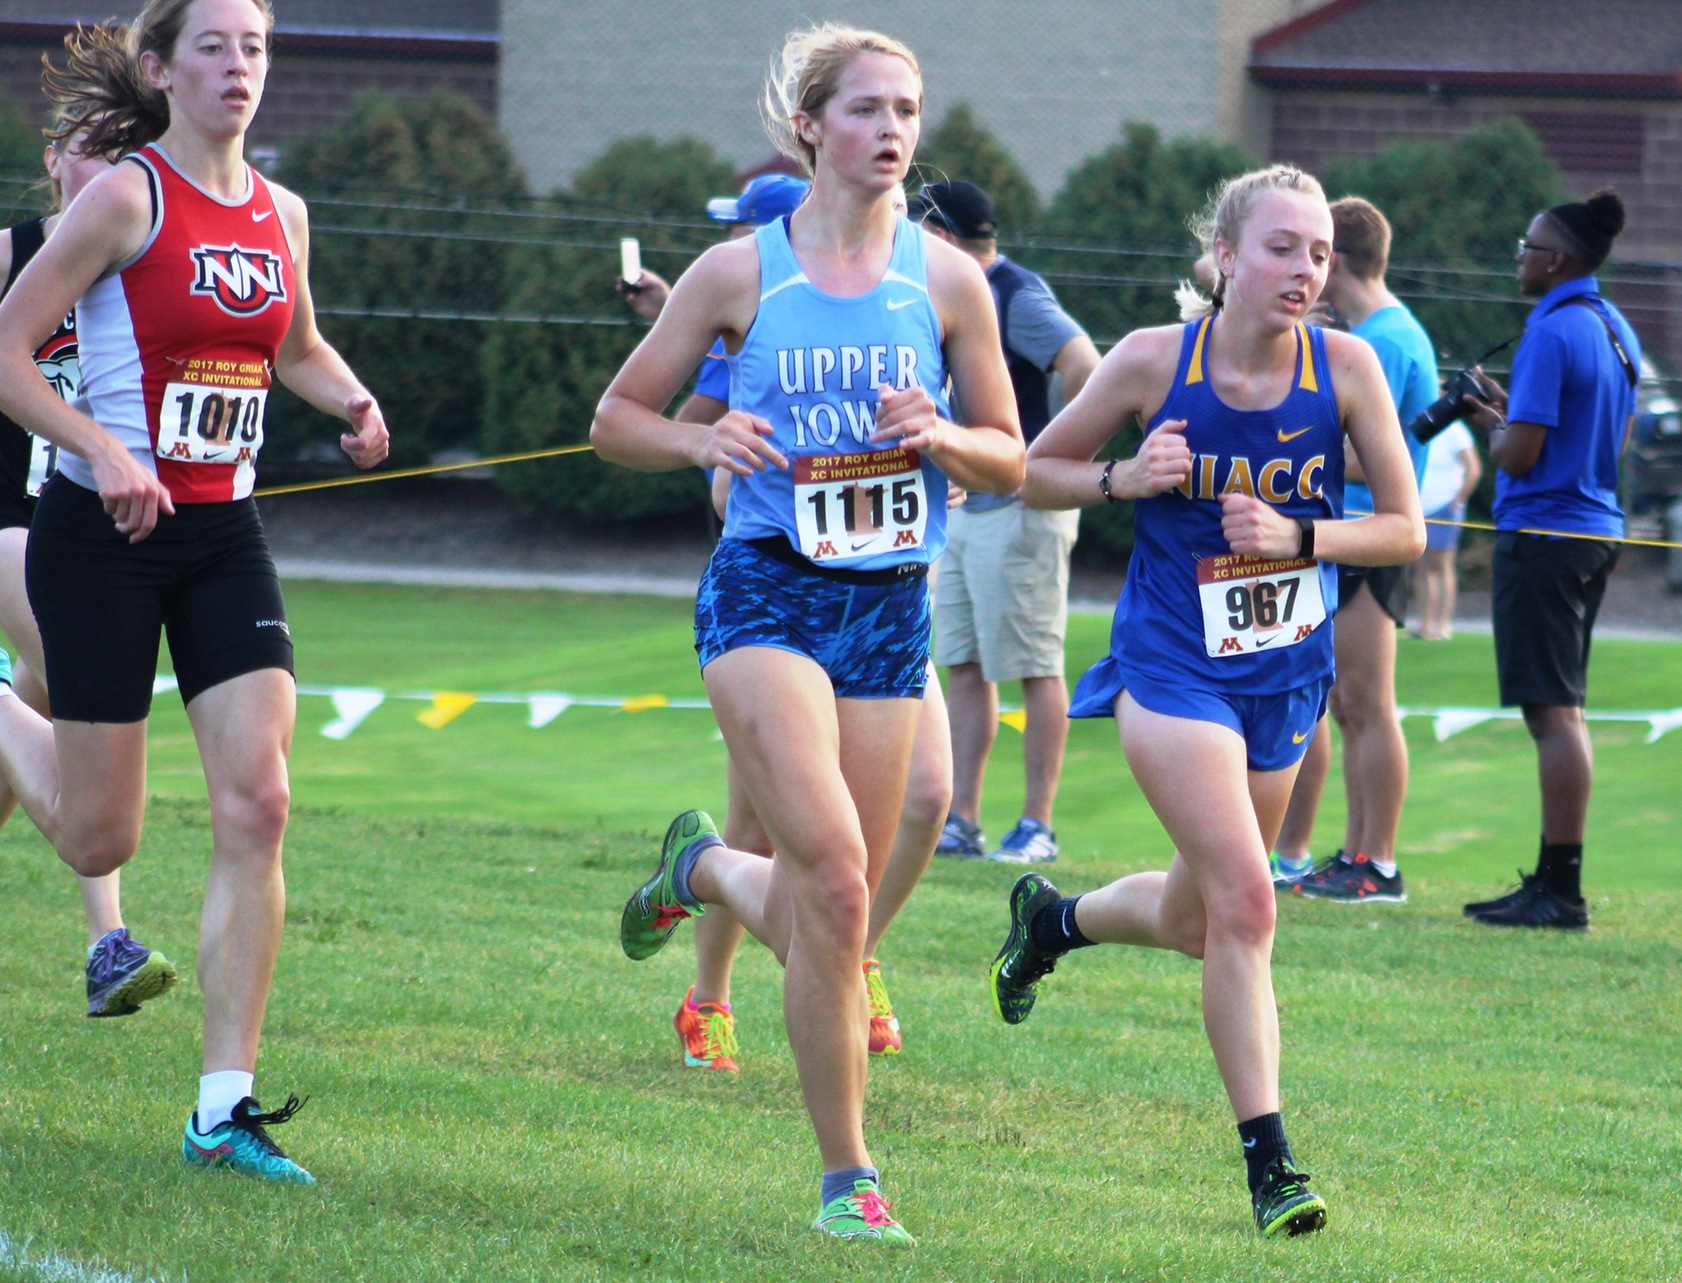 Freshman Julia Dunlavey led the Lady Trojans with a 73rd-place finish at the Griak Invite on Saturday.